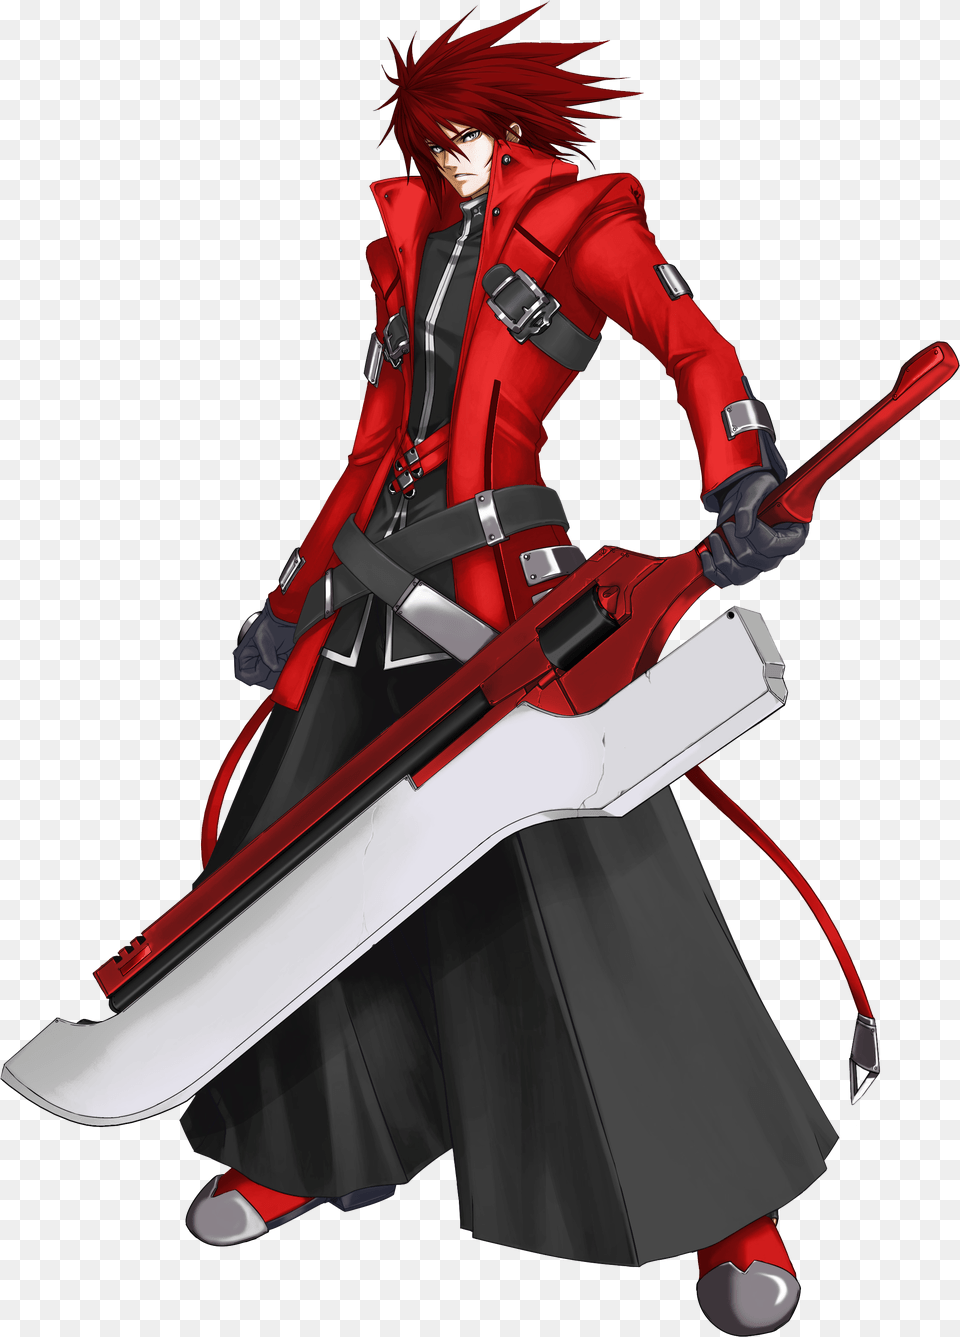 Rwby X Blazblue Ruby Rose Ragna The Bloodedge By Narayank Ragna The Bloodedge Sword, Book, Comics, Publication, Clothing Png